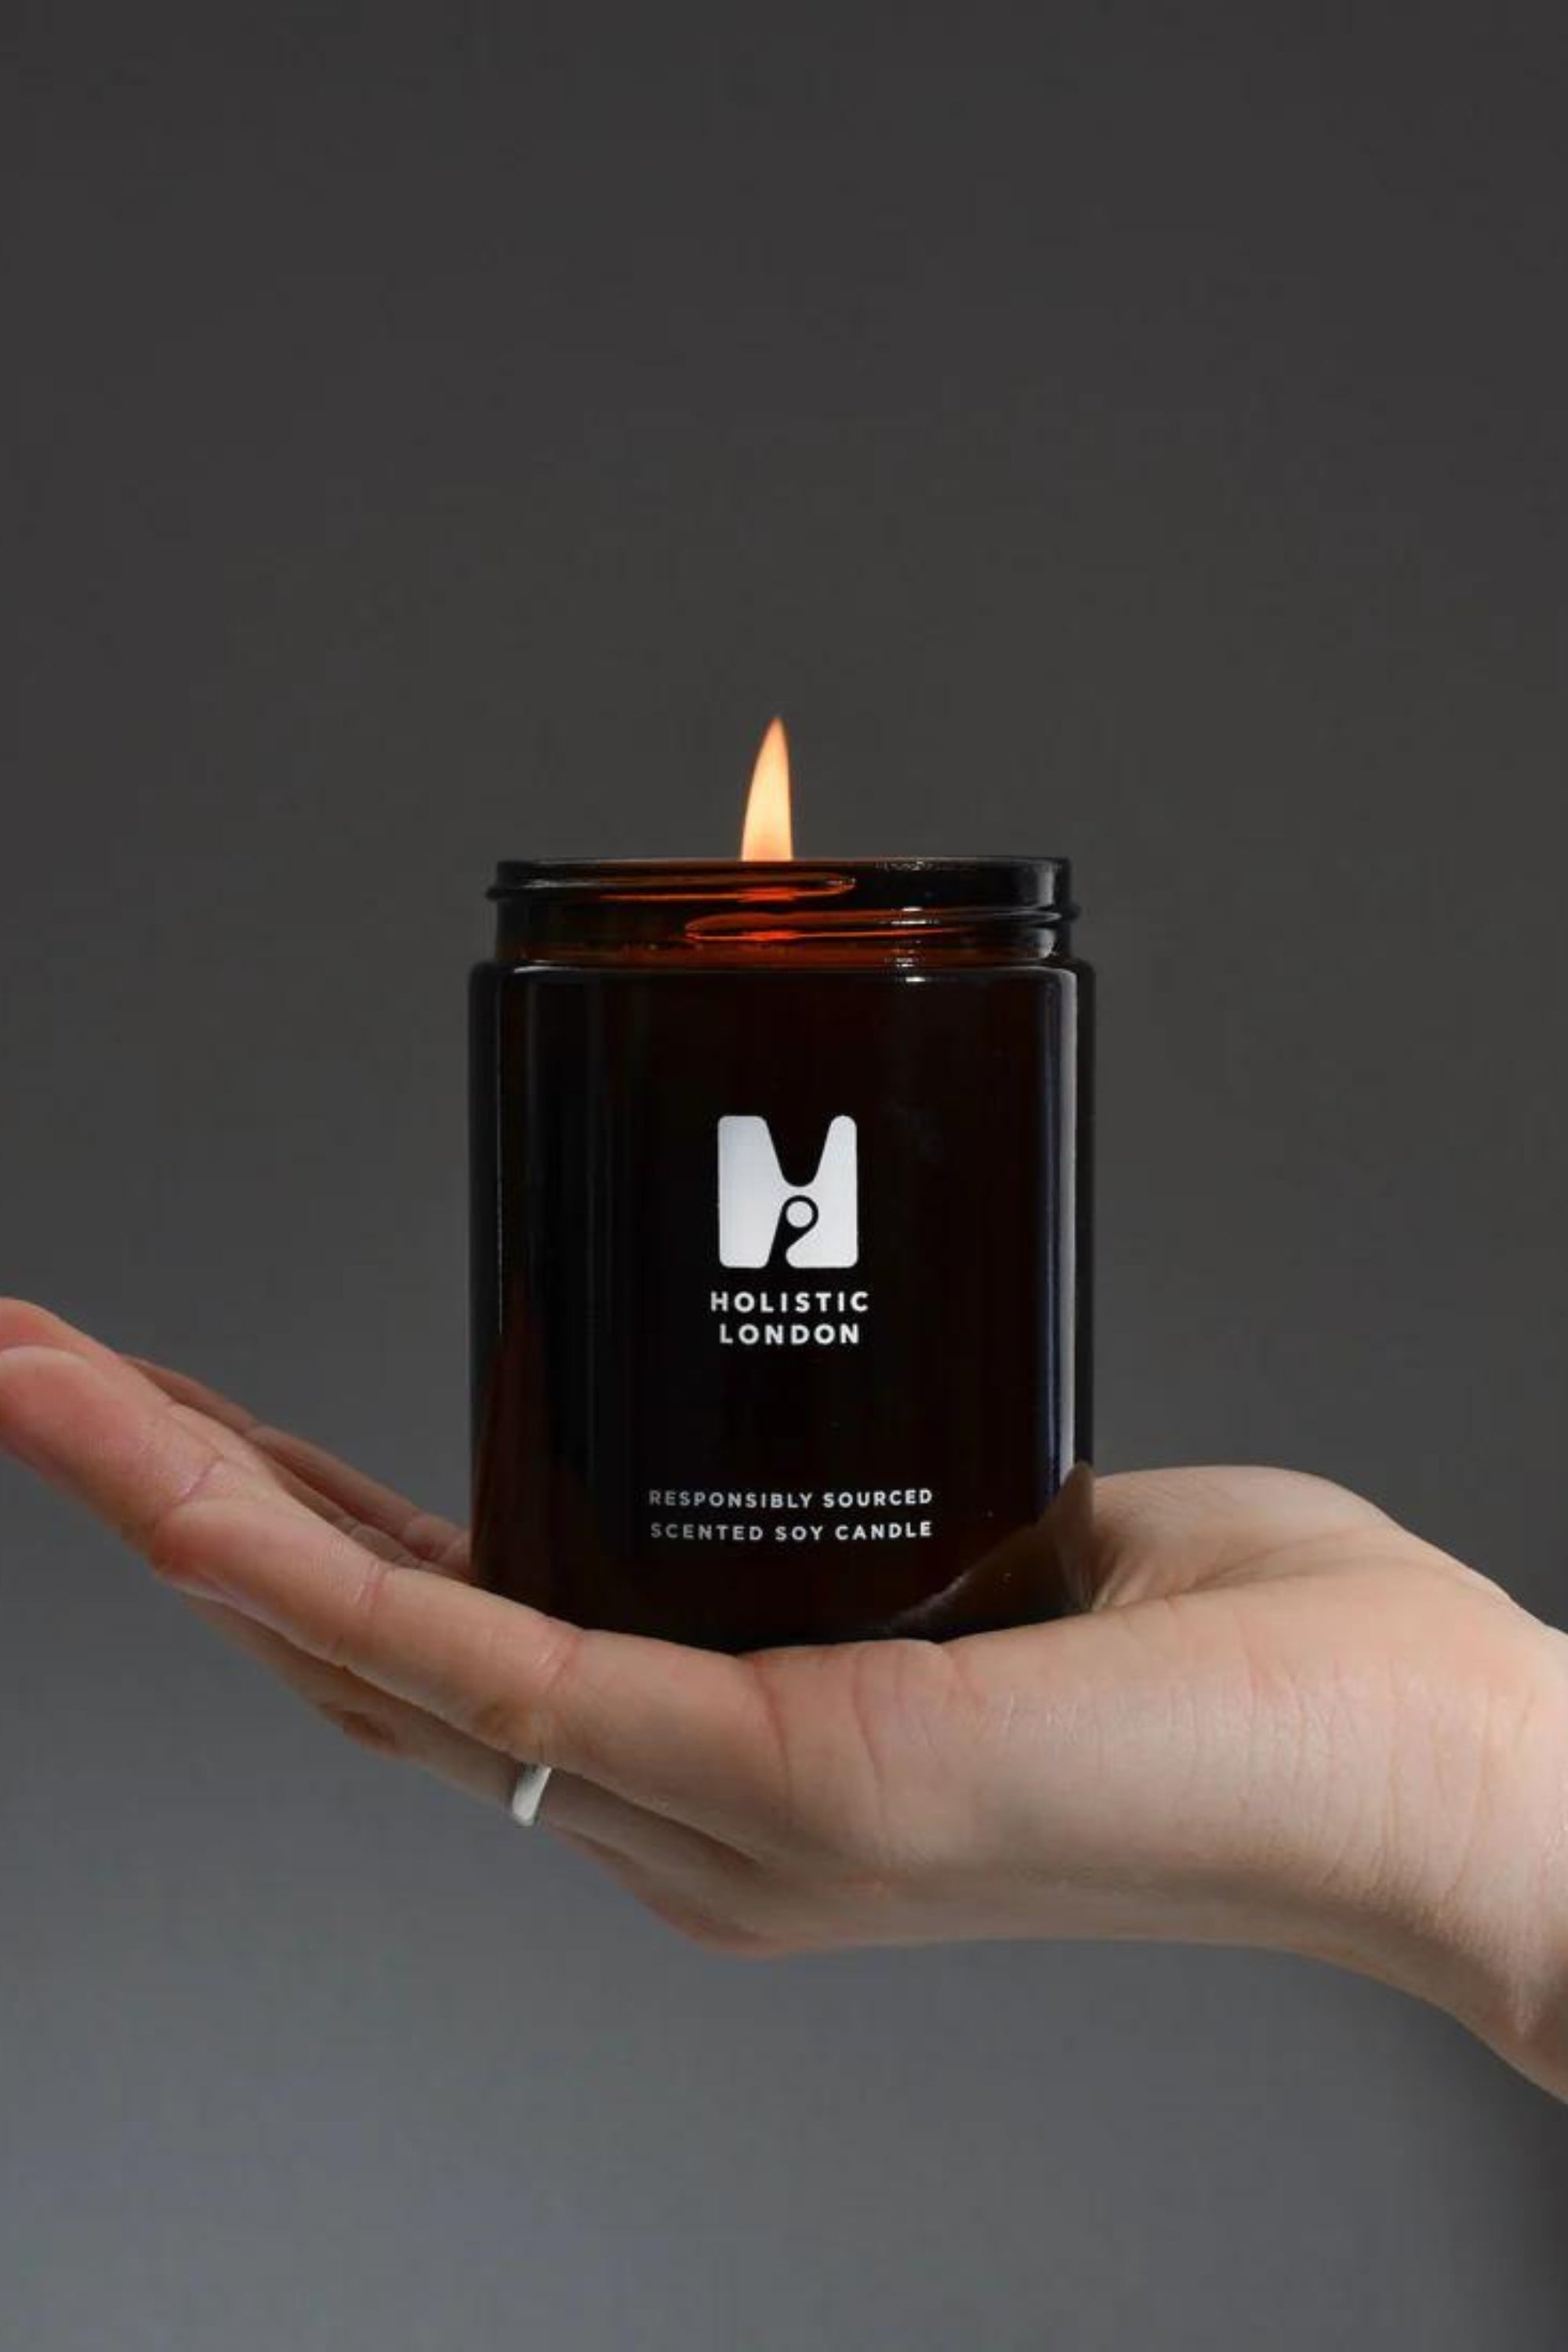 100% natural vegan cruelty free soy wax handcrafted sustainable essential oil blend candles with soothing effect to calm nerves, tension and treat anxiety, stress and insomnia, to unwind and relax. Made in London. 